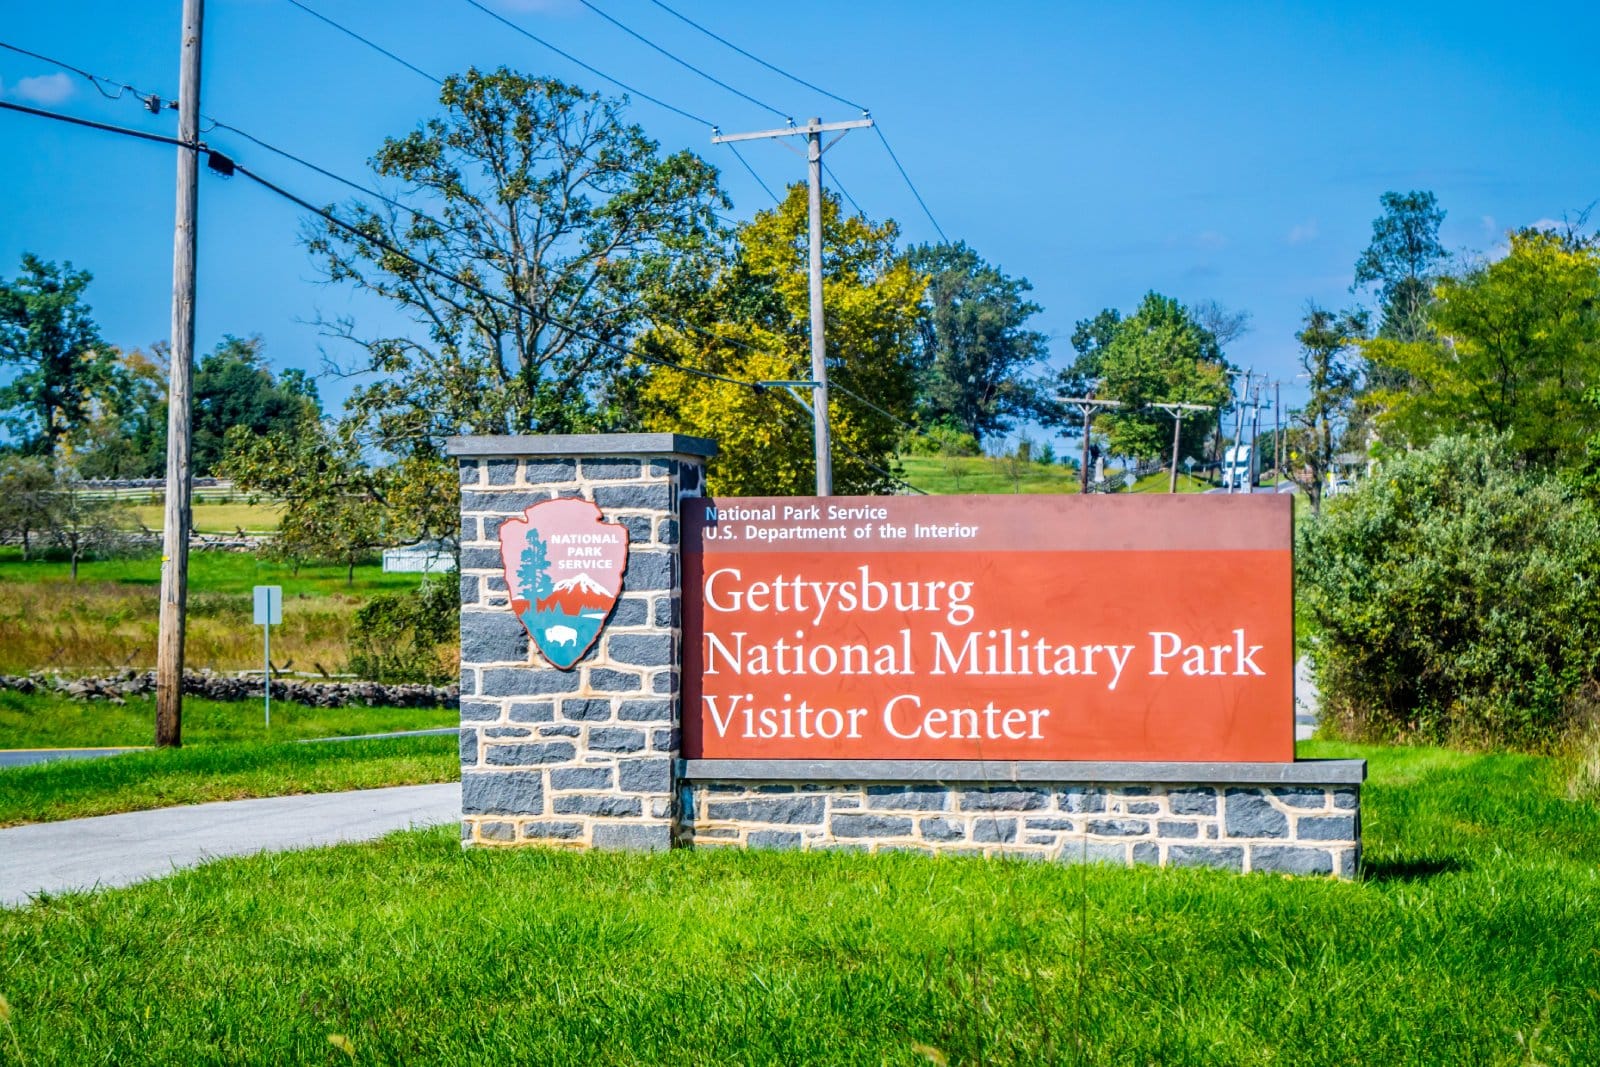 <p class="wp-caption-text">Image Credit: Shutterstock / Cheri Alguire</p>  <p>Tourism in Pennsylvania generates around $43 billion, with Gettysburg National Military Park and other historic sites offering free admission but paid tours and experiences available.</p>